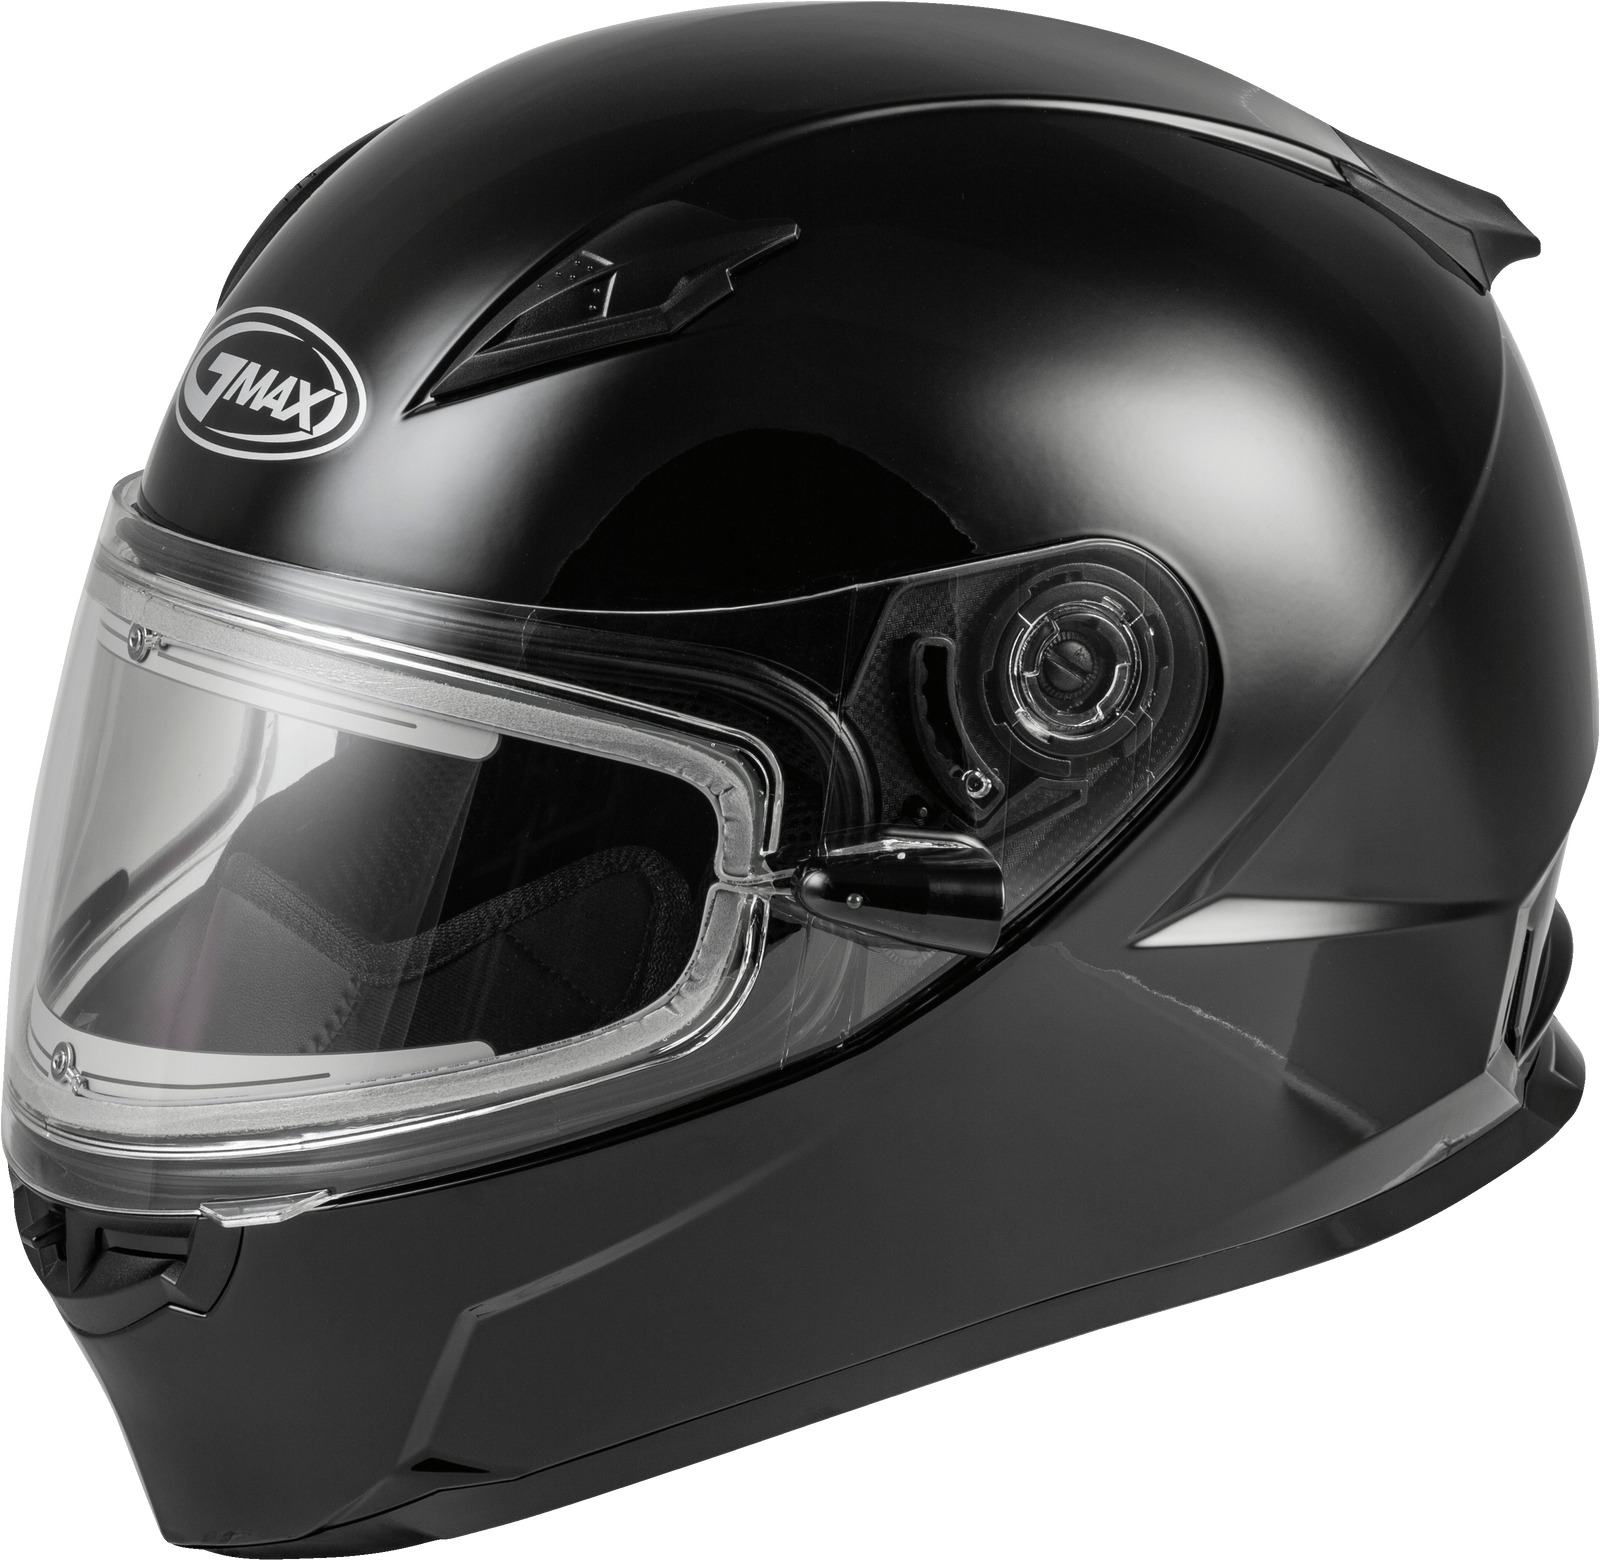 GMAX FF-49S Full Face Snow Helmet Black with Electric Shield XL